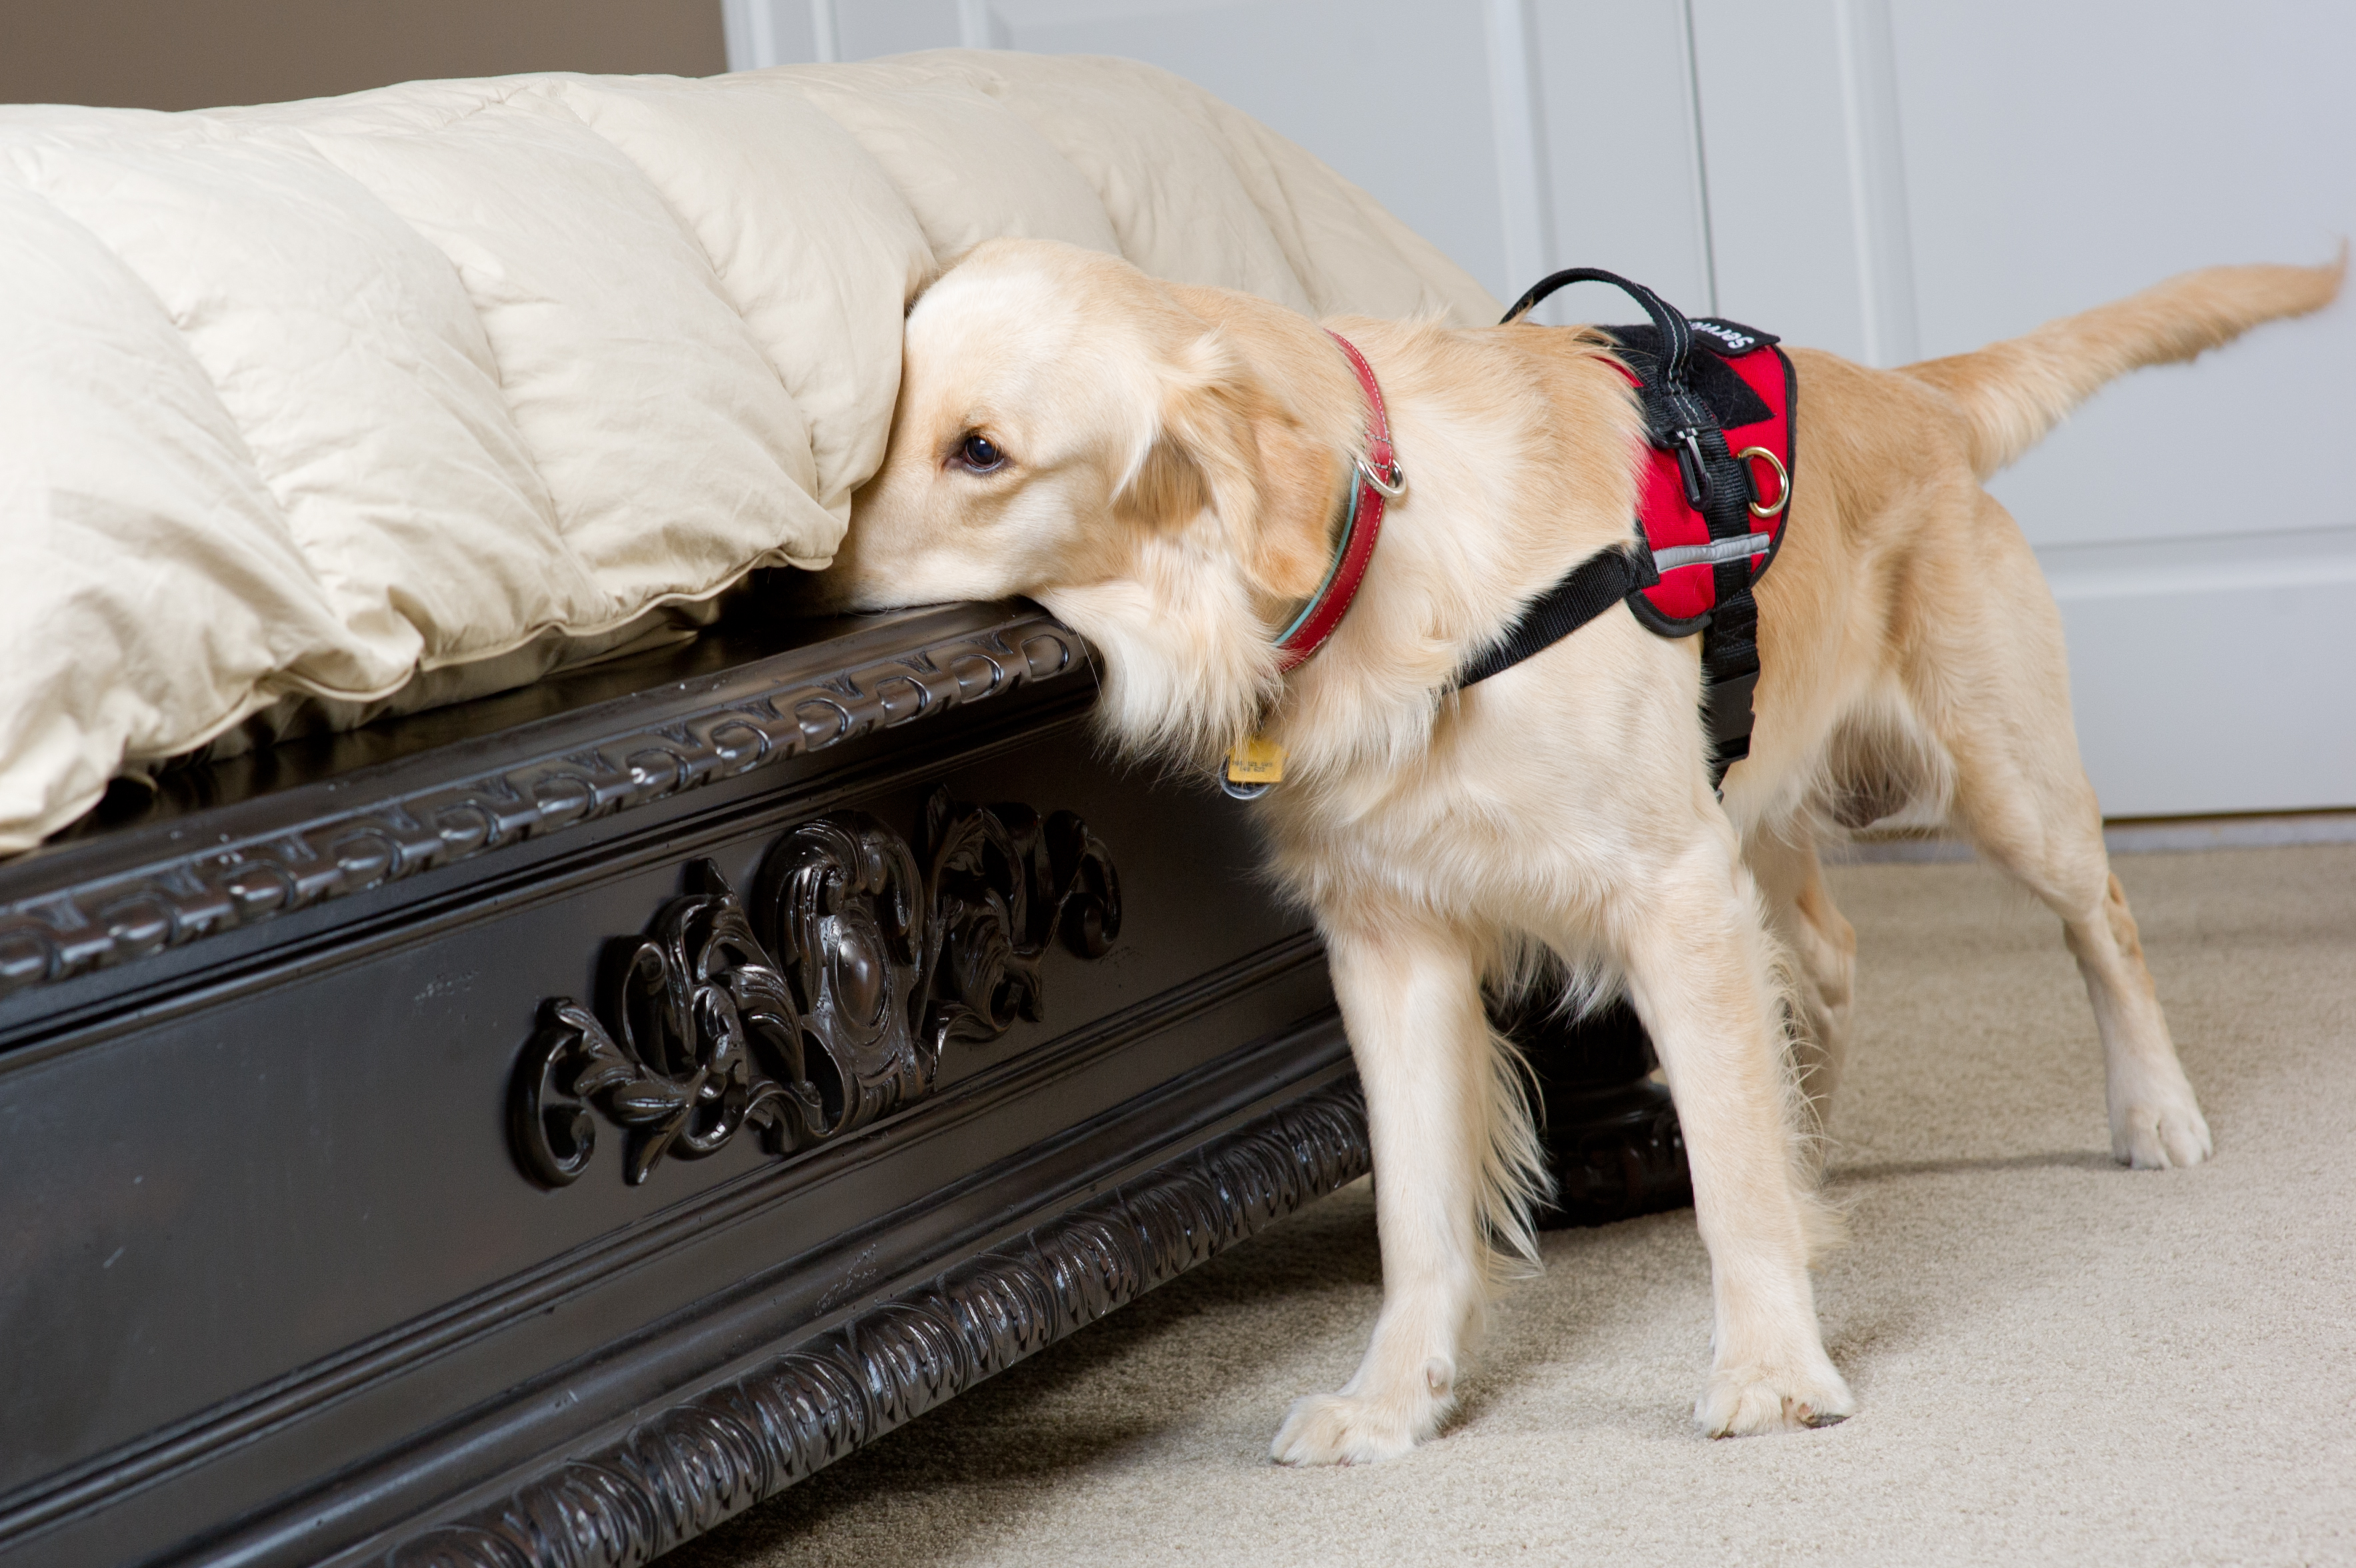 k-9-inspection-for-bed-bugs